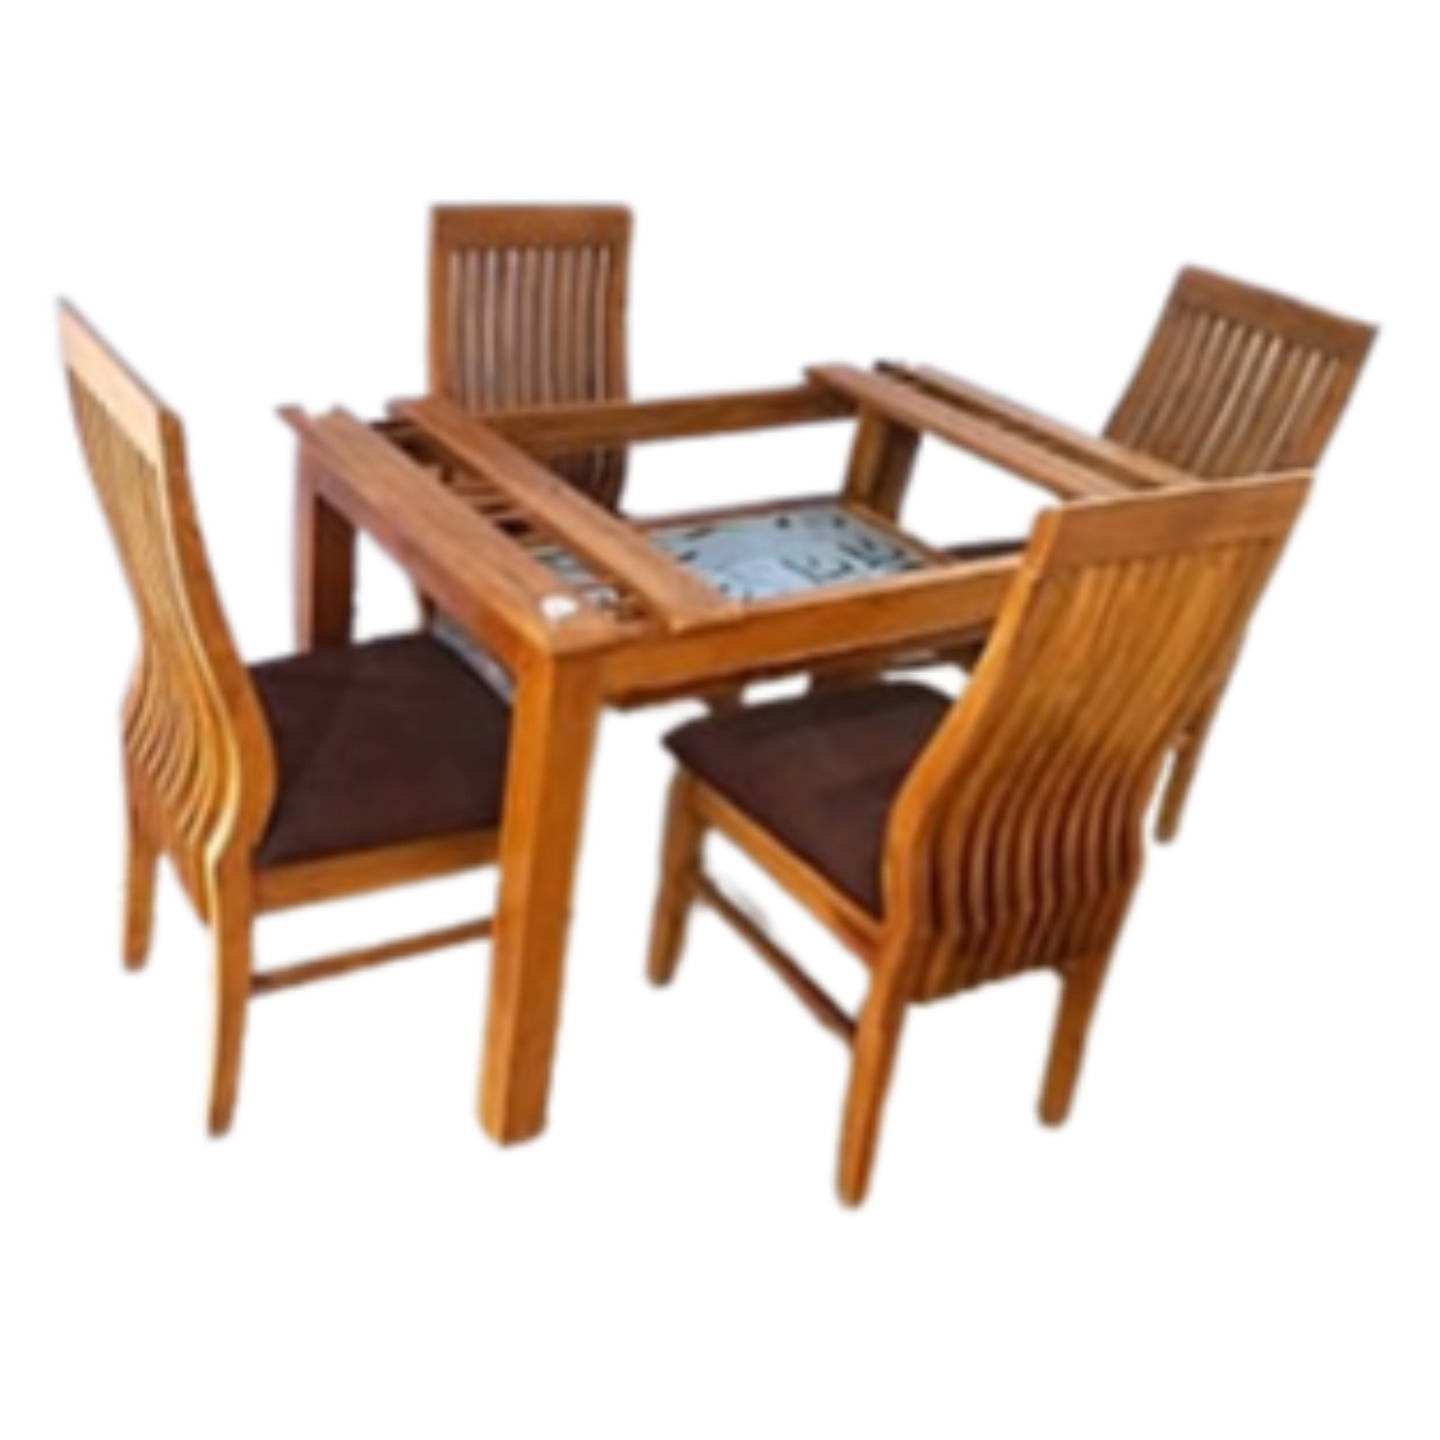 DW Glass Top L-012 Sahil Self Four Seater Dining Table Set in Brown Colour